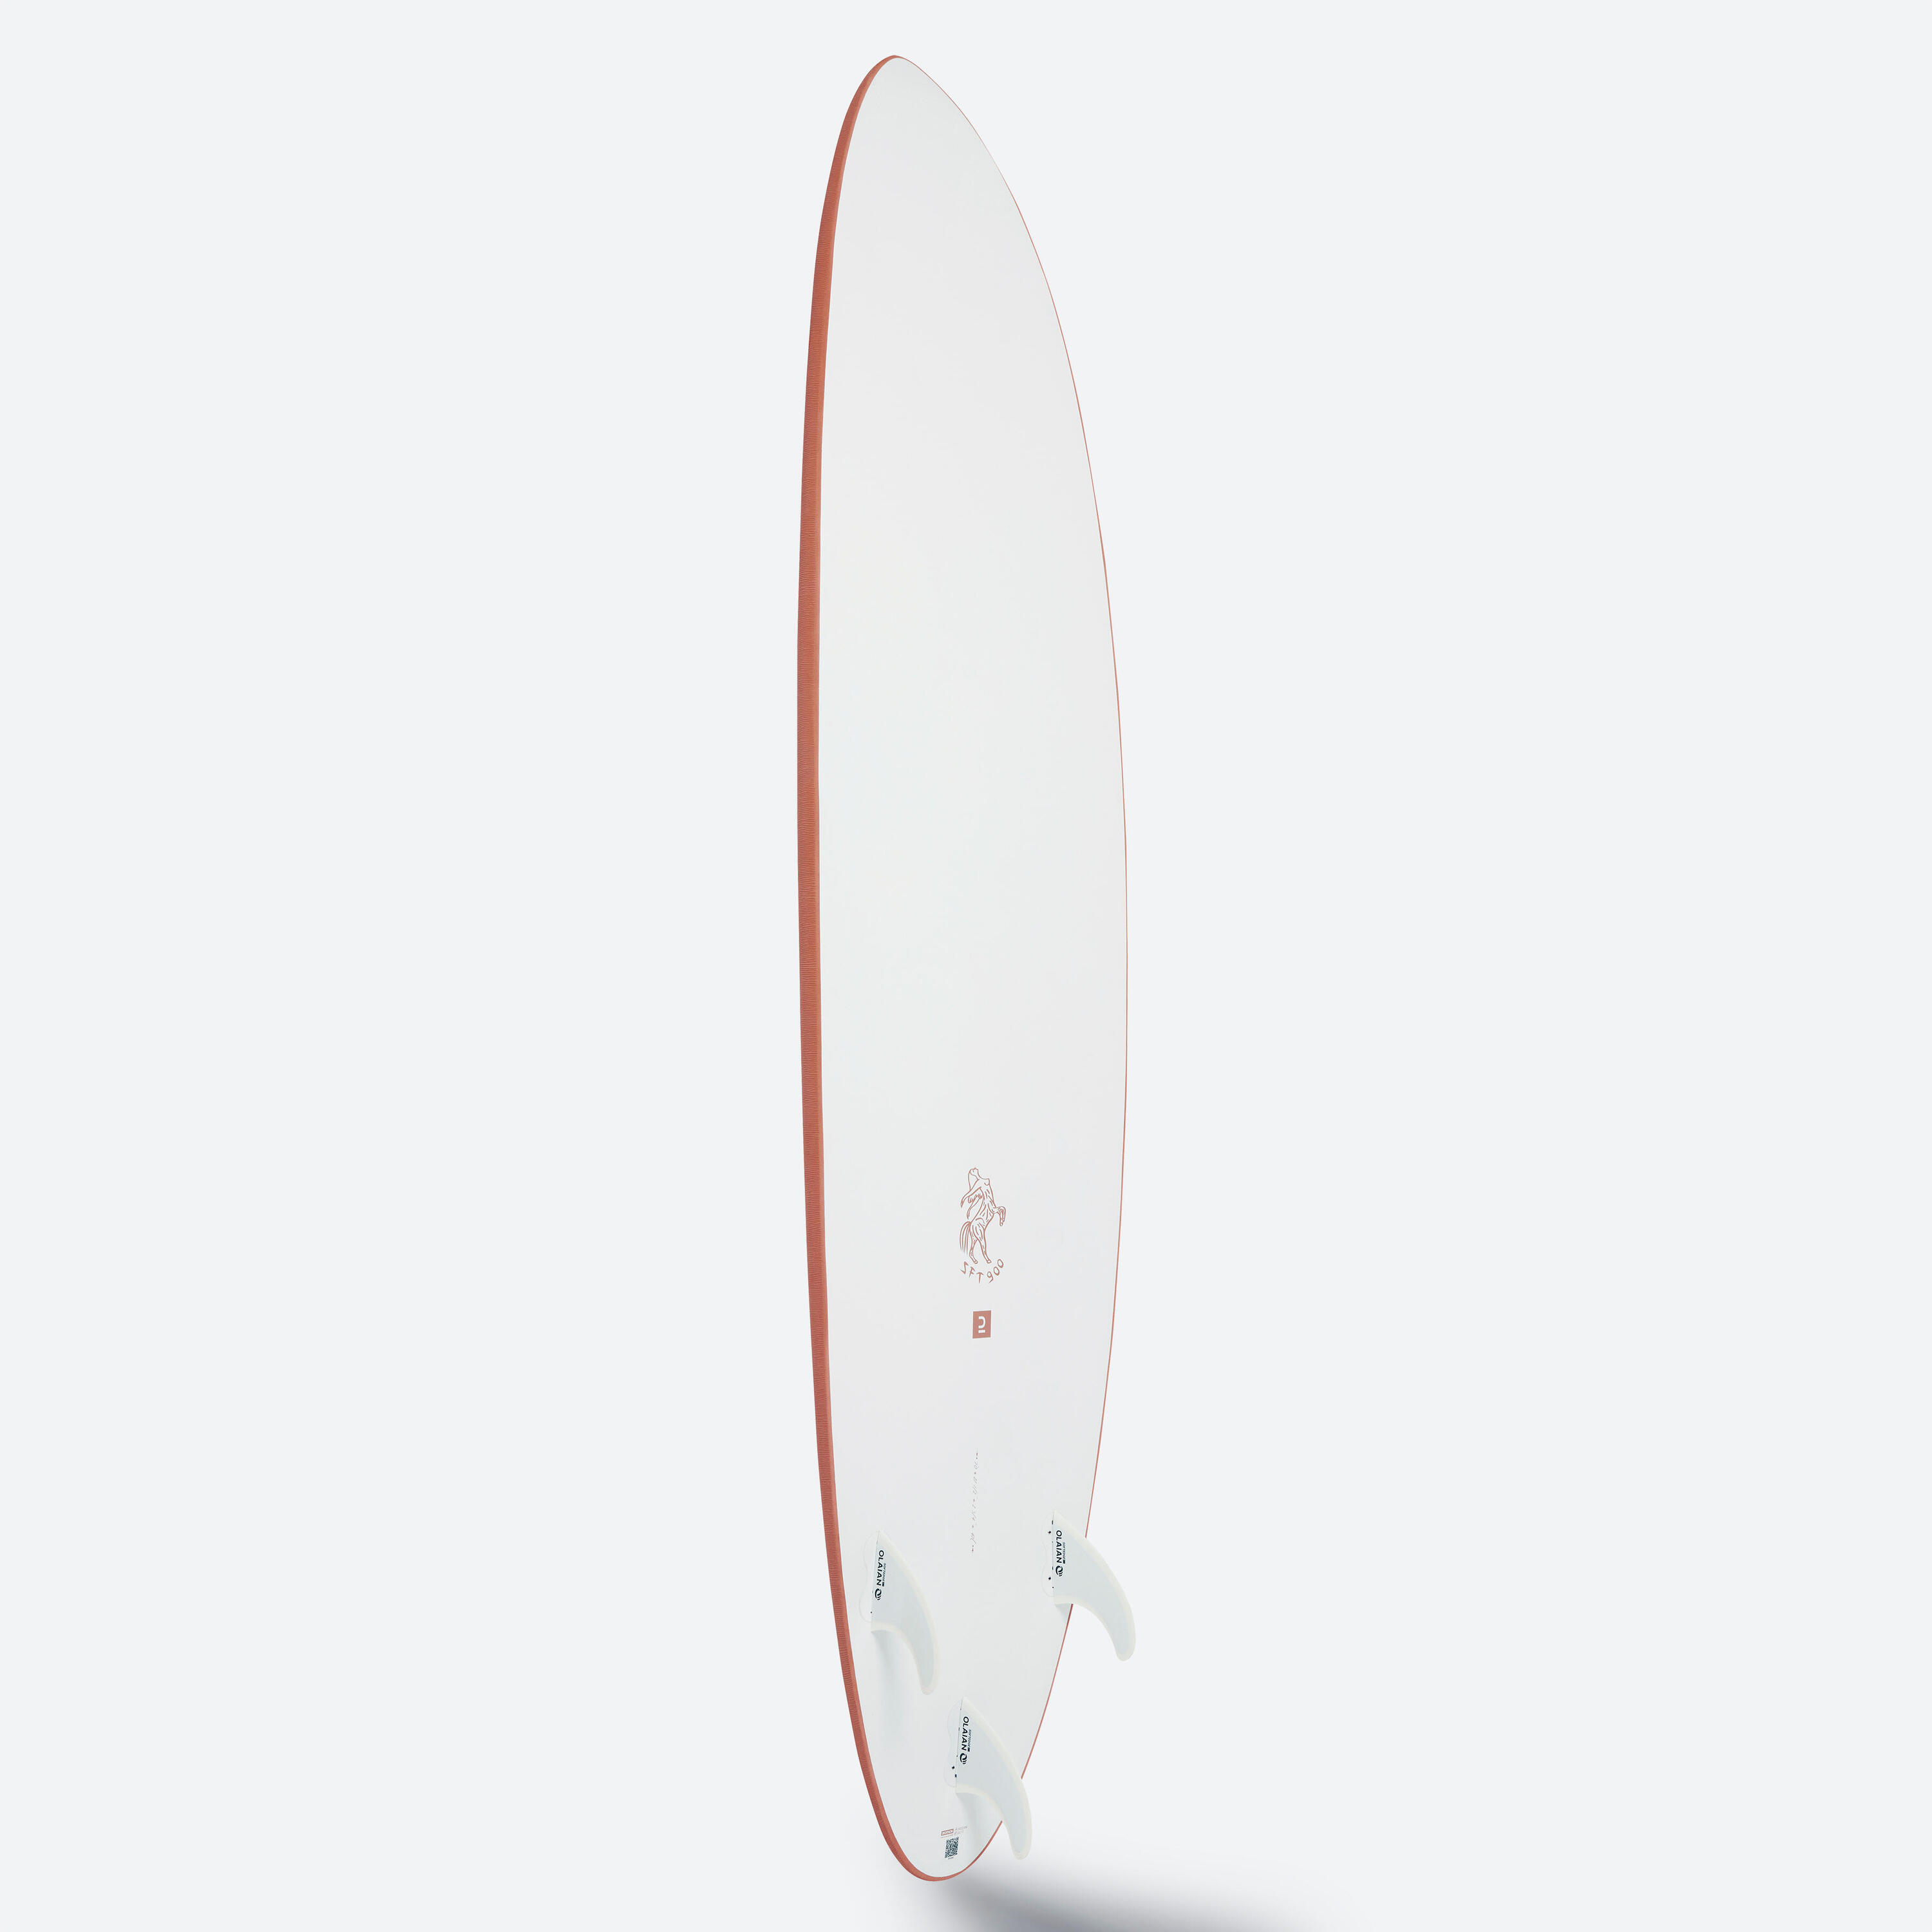 SURFBOARD 900 EPOXY SOFT 7' with 3 fins 13/14